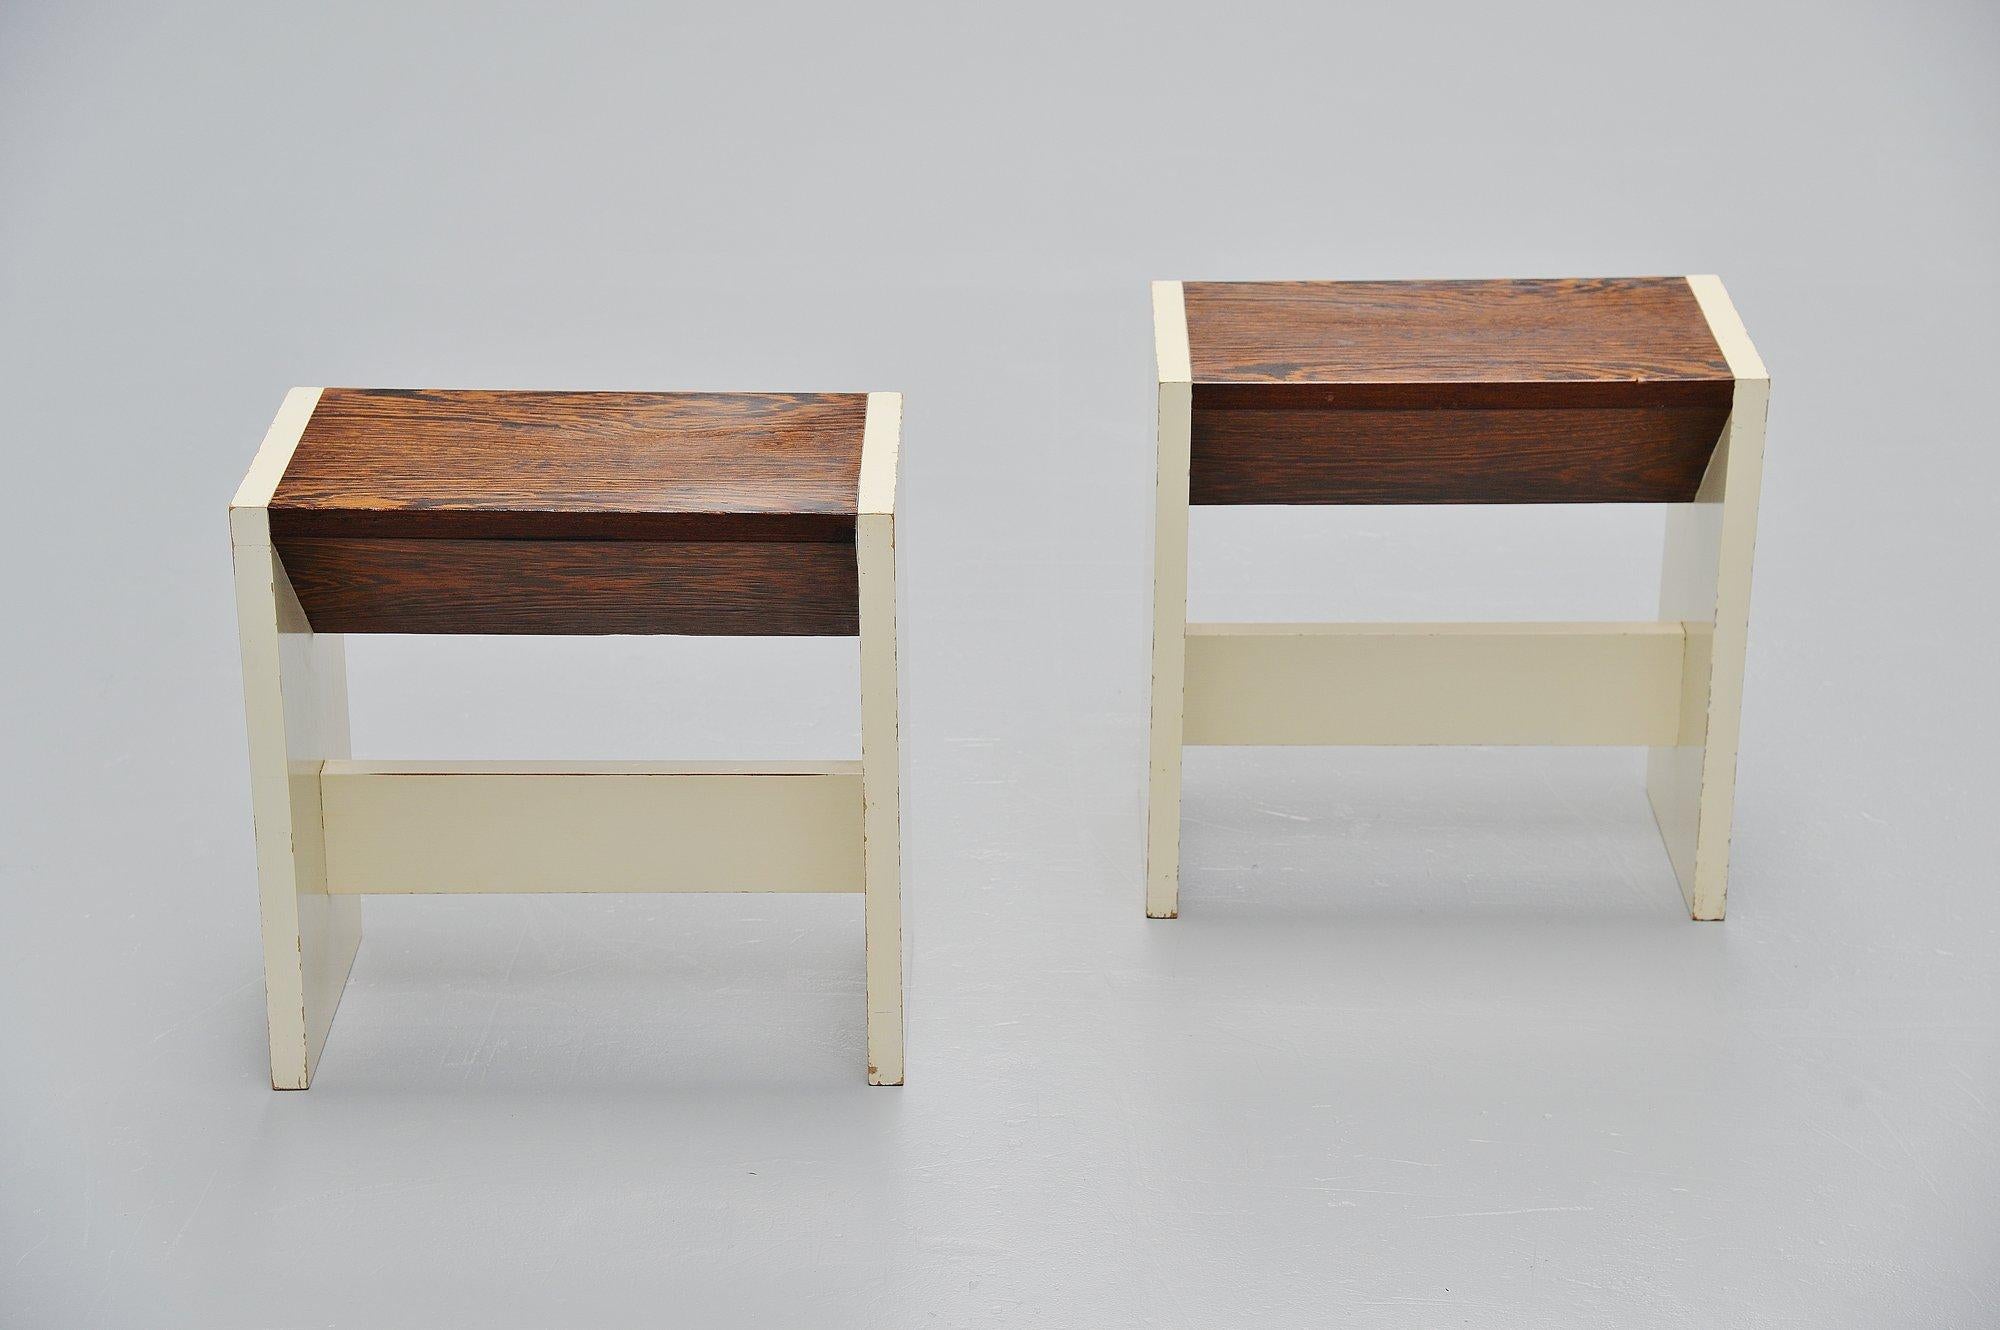 Very nice and unique pair of architectural stools designed by Pieter Maris, Weesp, Holland, 1960. This unusual shaped set of stools were made of white painted plywood and wenge wooden seats with unusual shape. The stools have a fantastic nice shaped